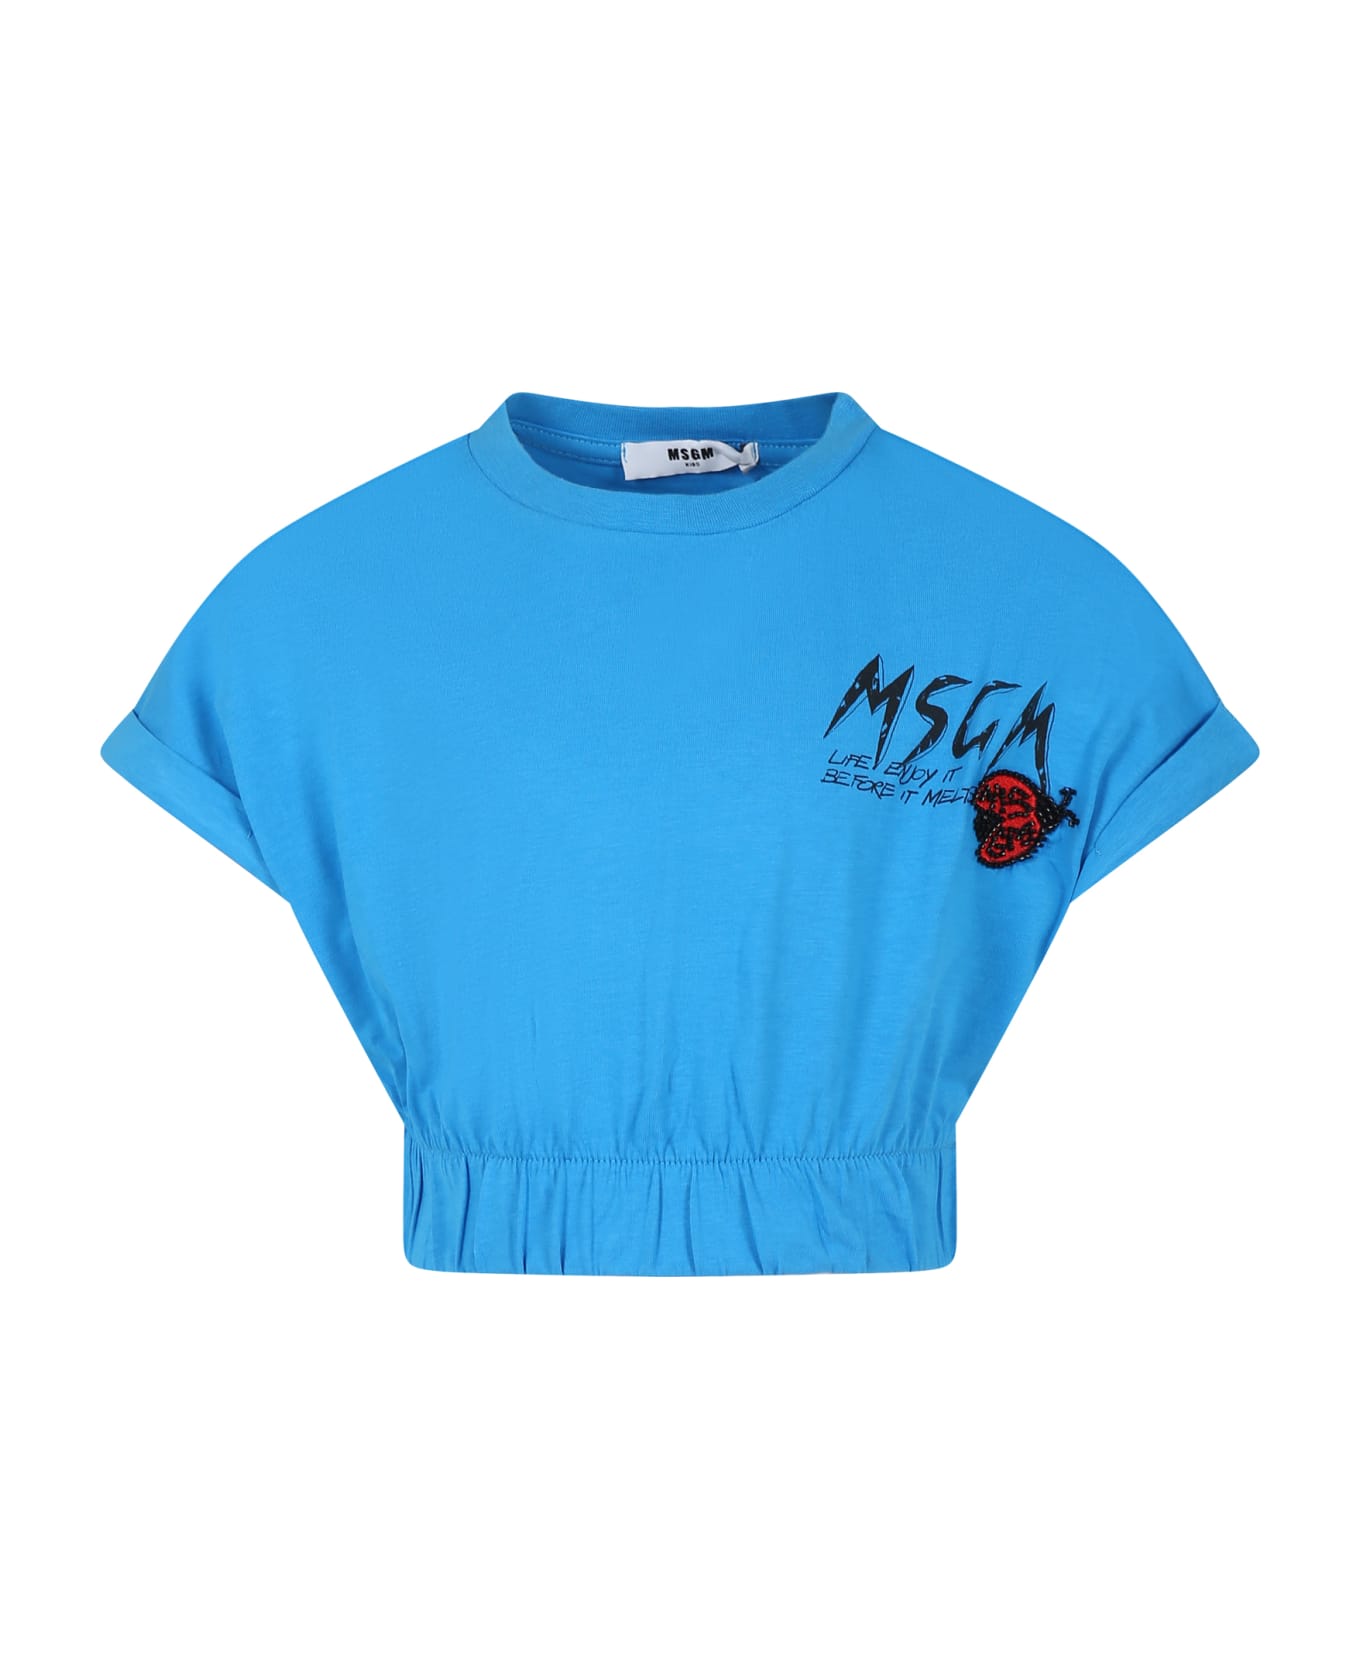 MSGM Light Blue Crop T-shirt For Girl With Logo And Ladybug - Light Blue